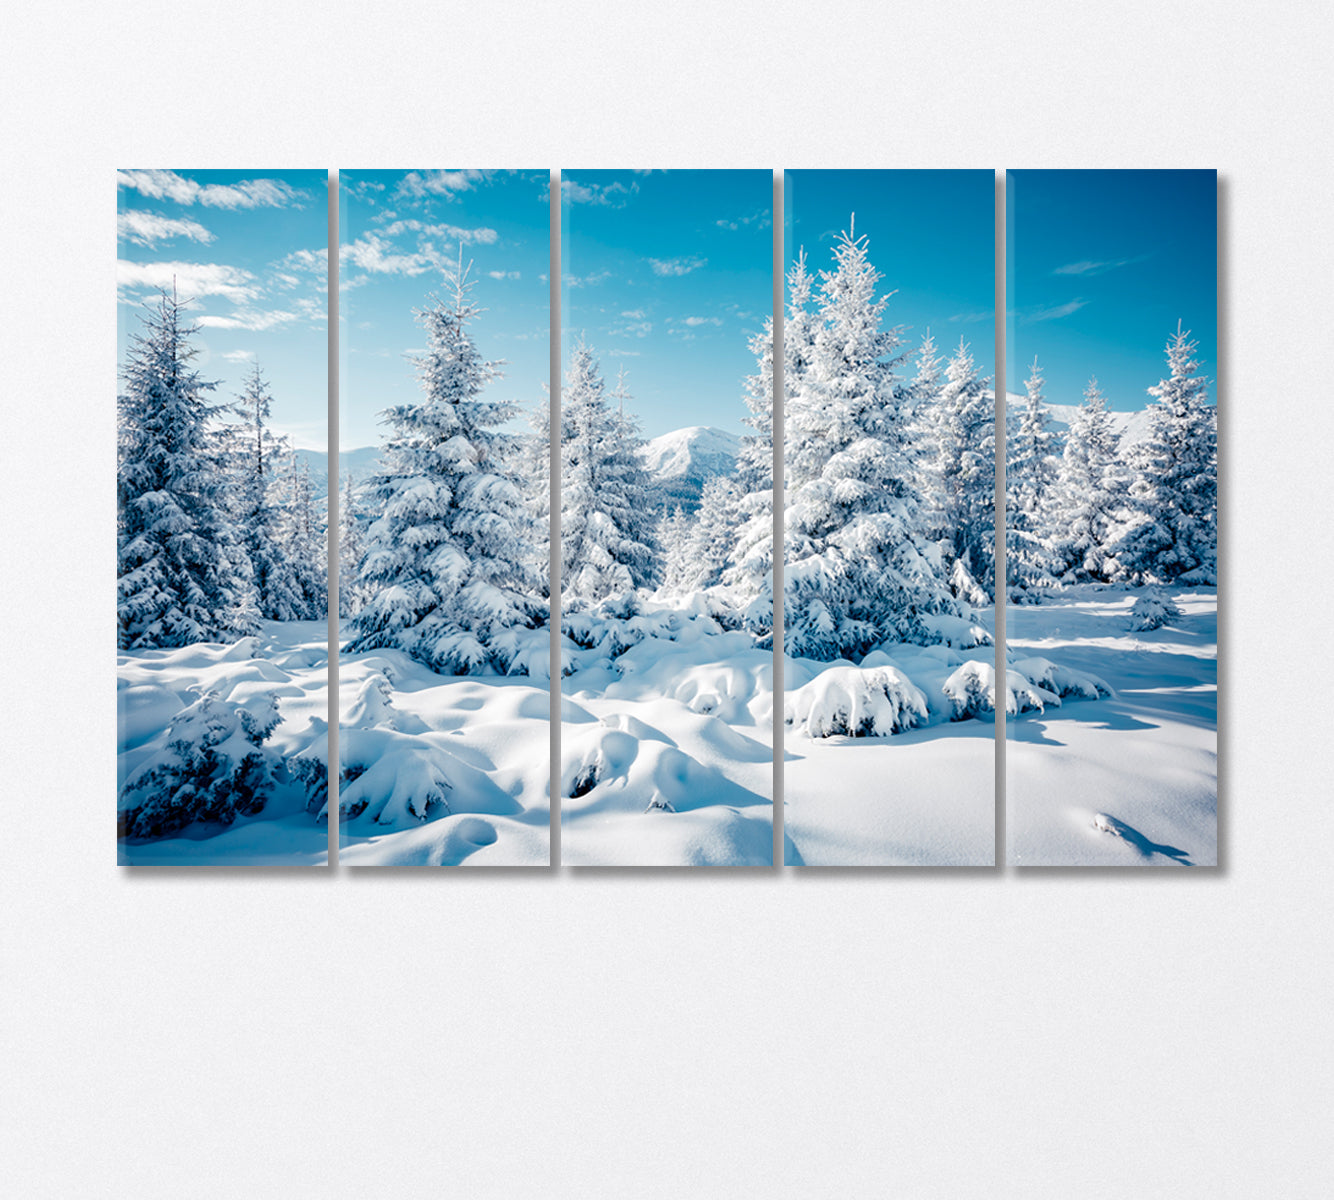 Snowy Spruce Forest in the Mountains Canvas Print-Canvas Print-CetArt-5 Panels-36x24 inches-CetArt